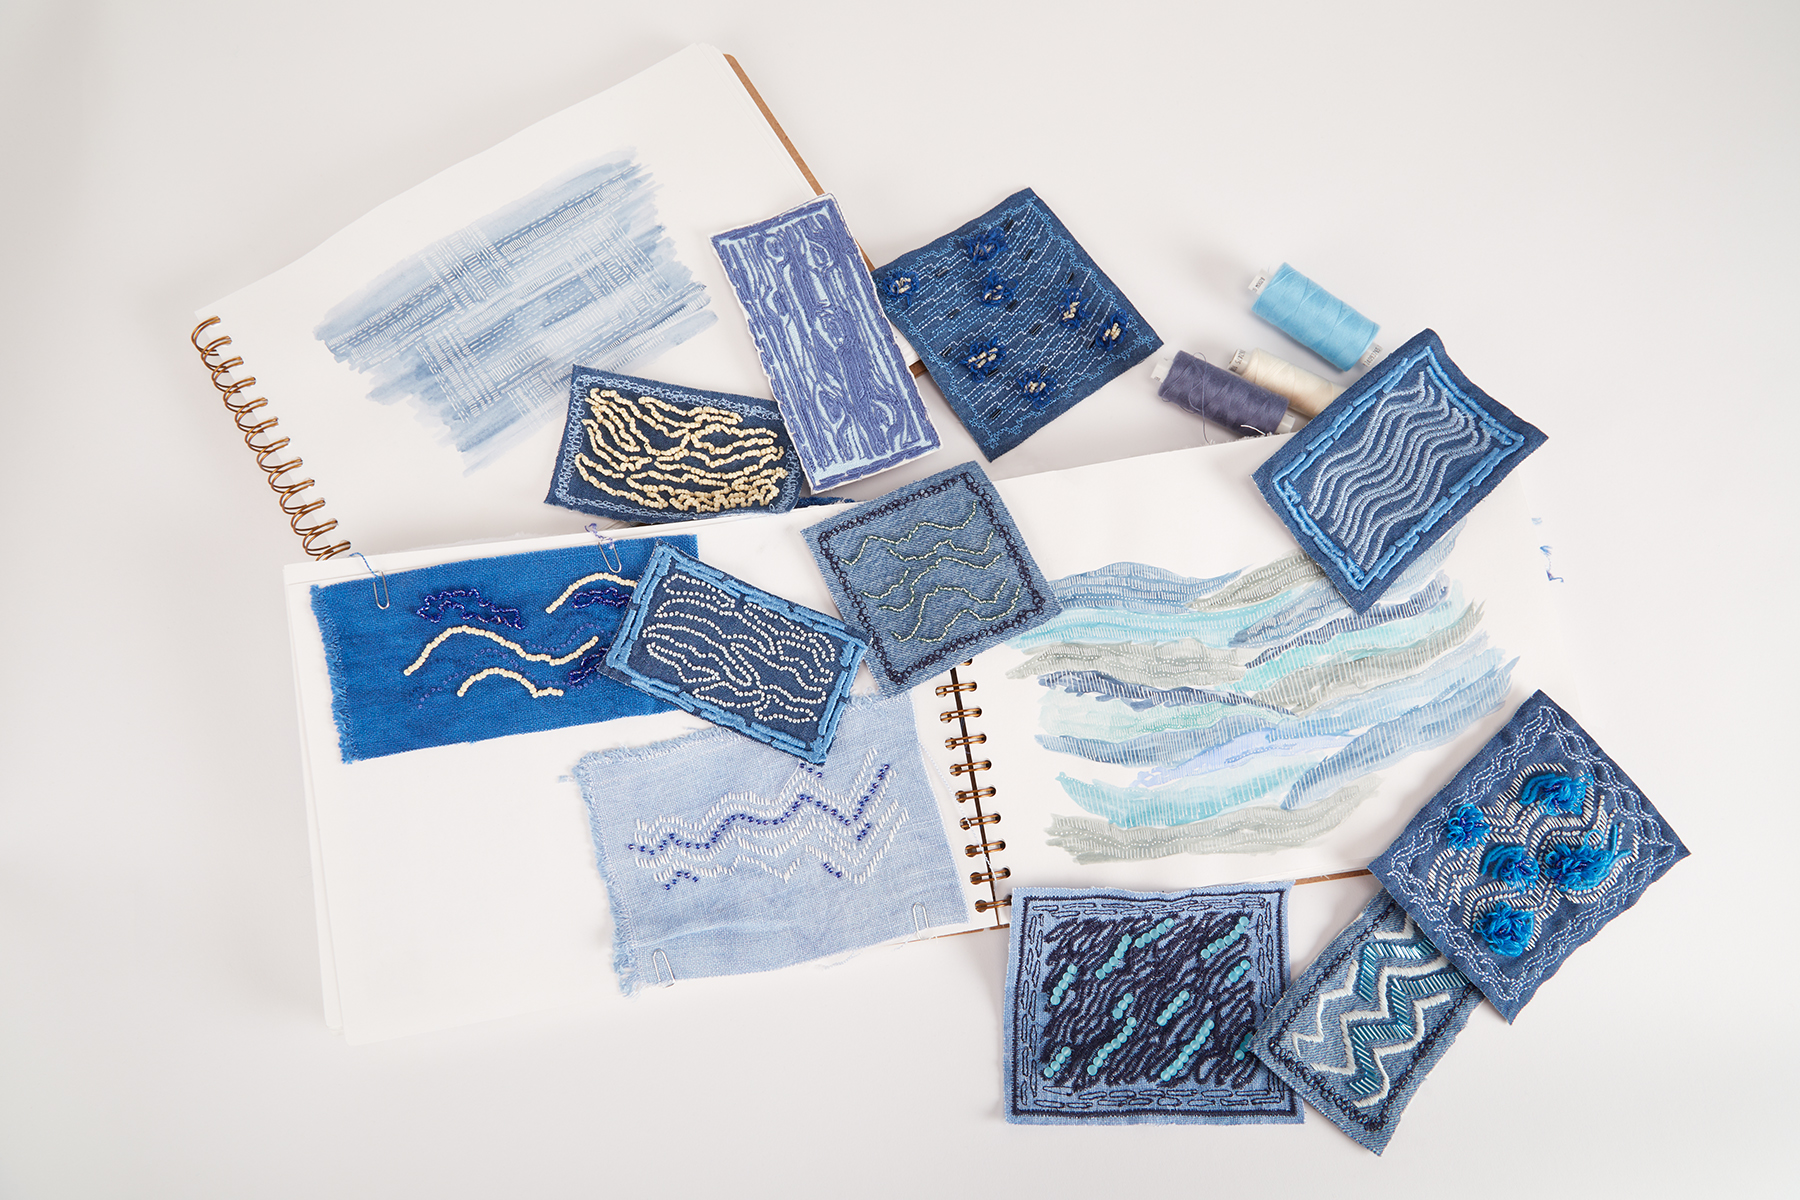 Photo of Initial drawings and hand embroidered patches by Isabel Sanderson